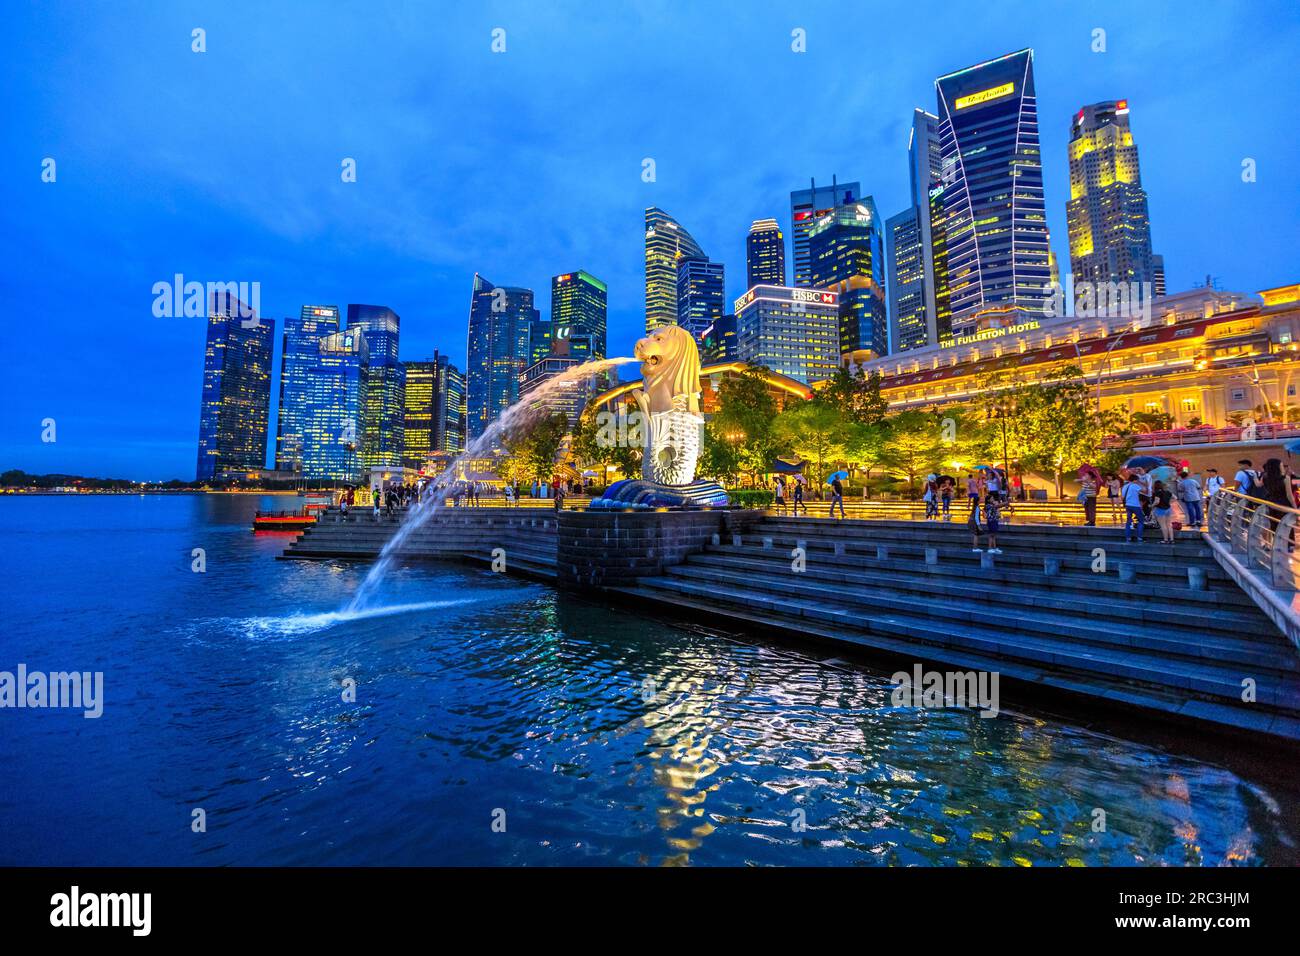 Singapore - April 27, 2018: night scenic Singapore touristic symbol at blue hour, the Merlion Statue in Merlion Park with luminous skyline of CBD Buil Stock Photo